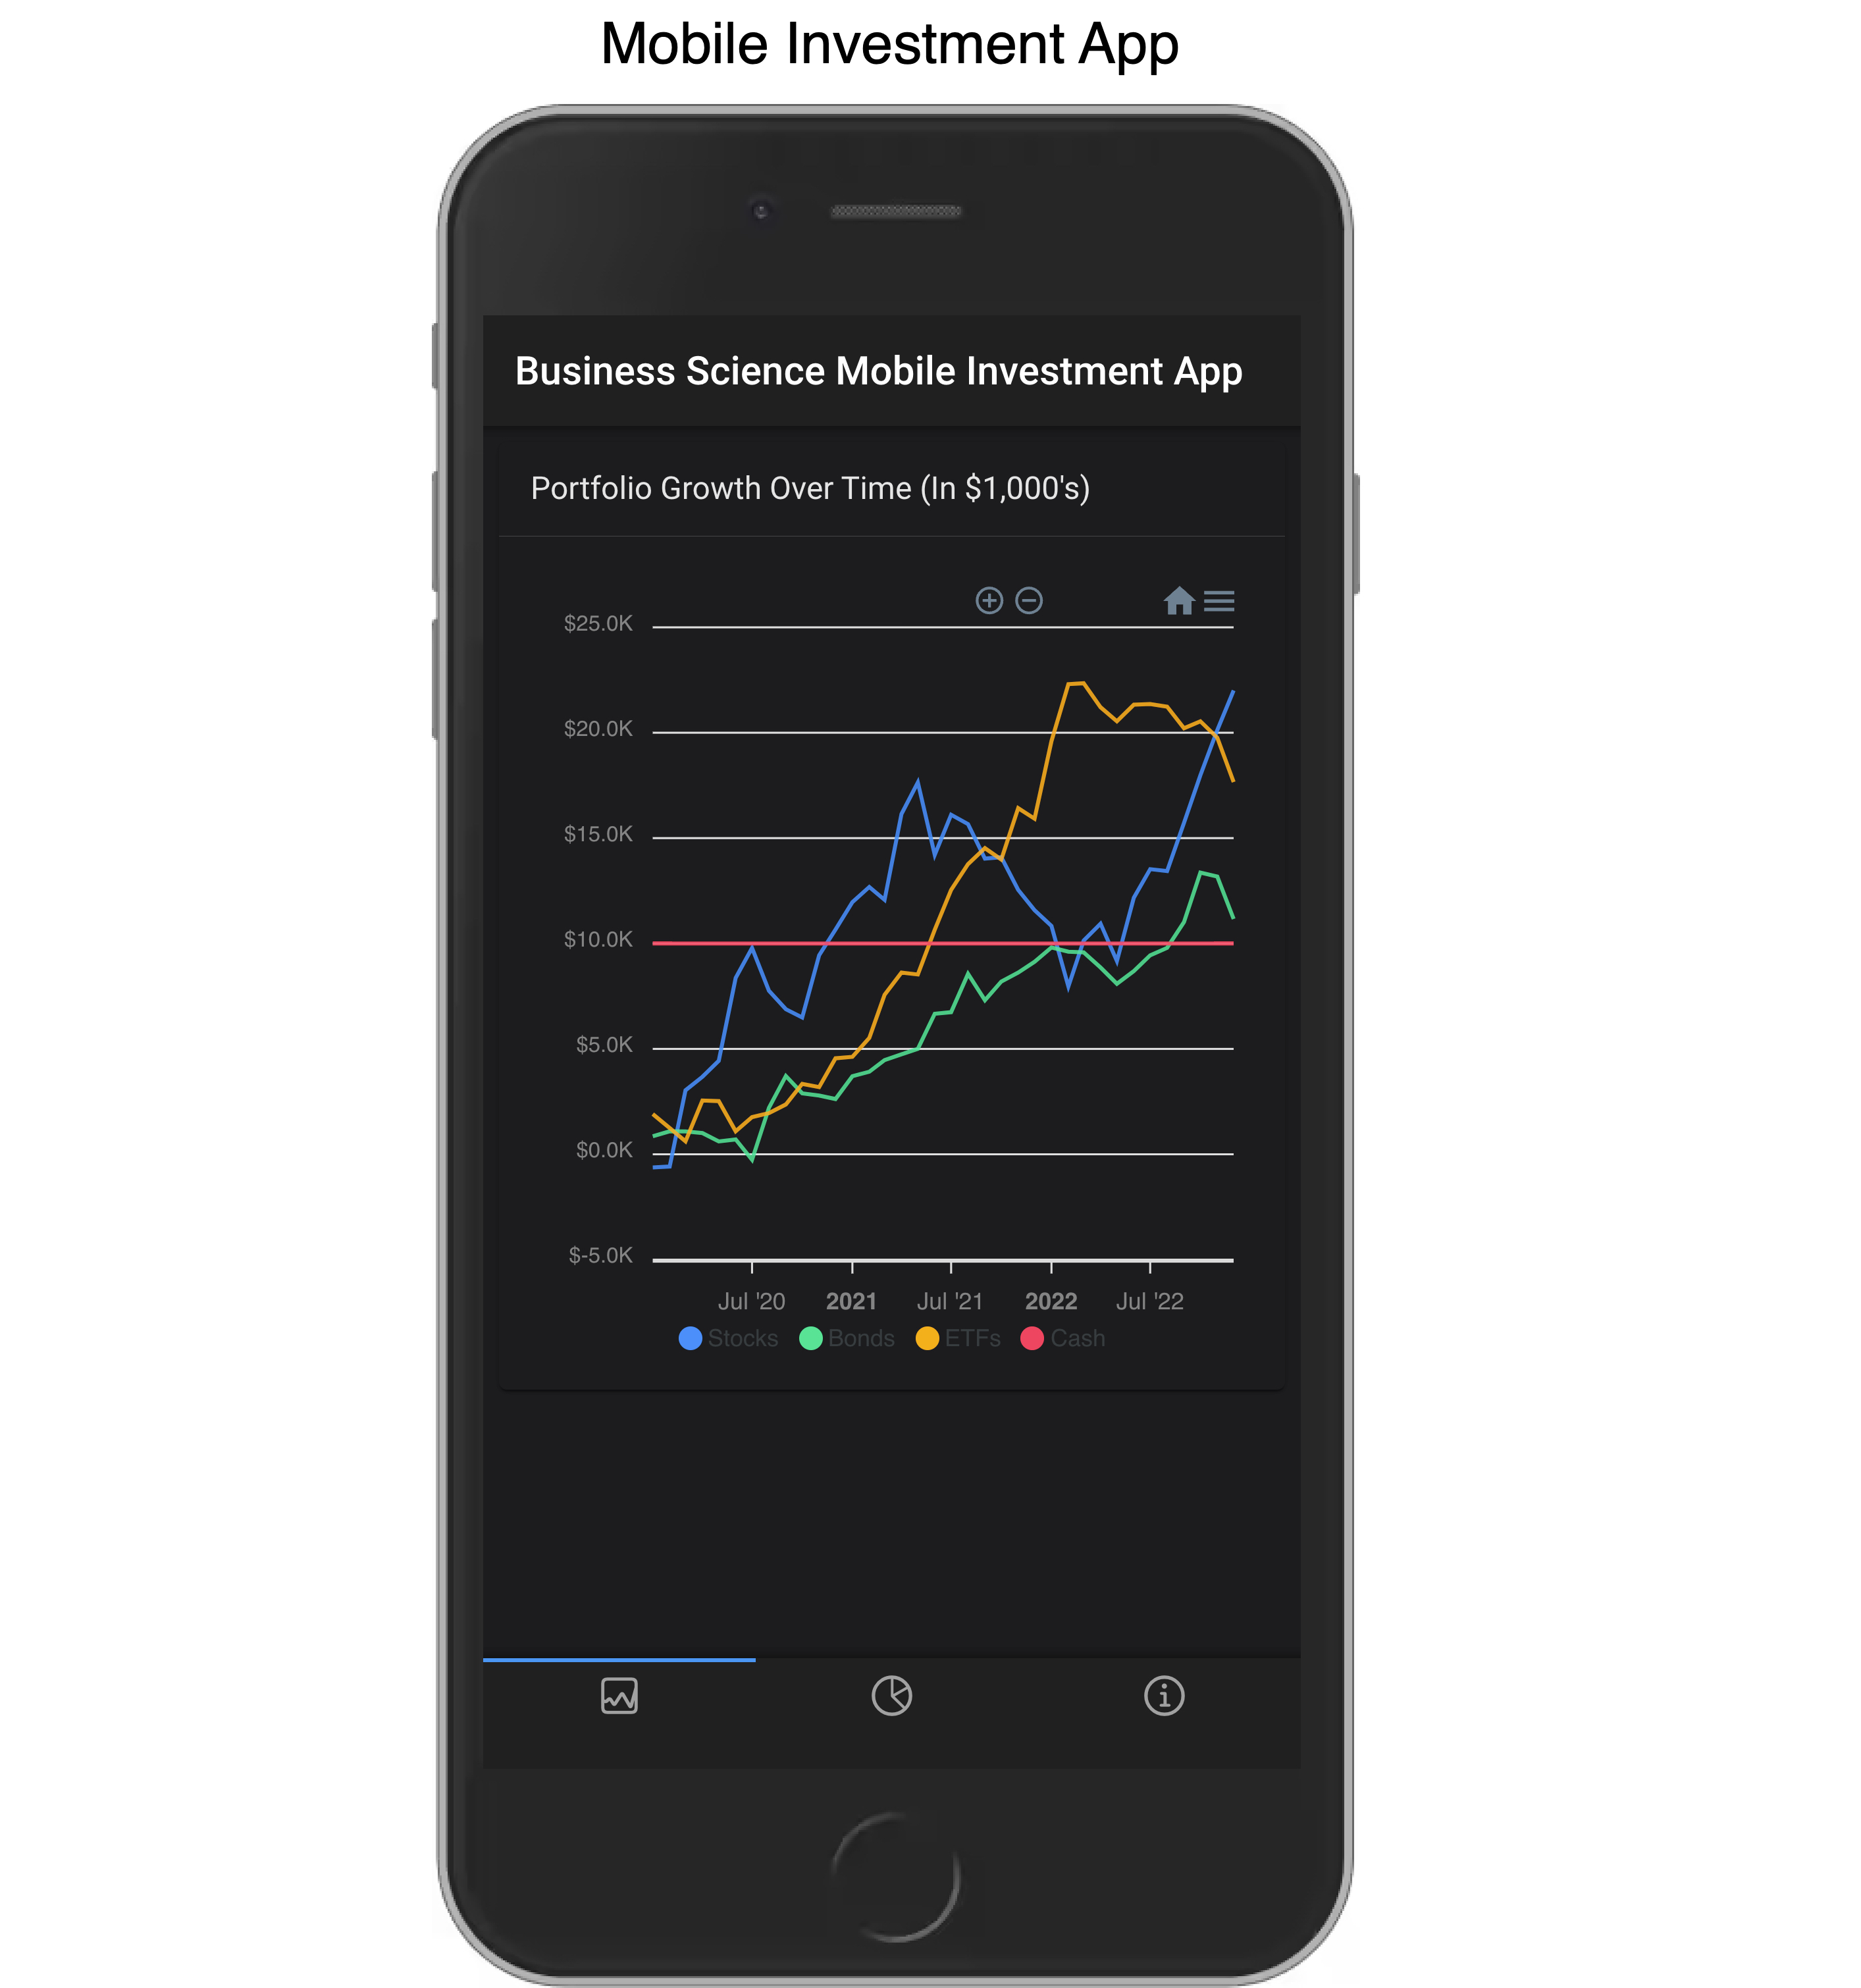 Mobile Investment App